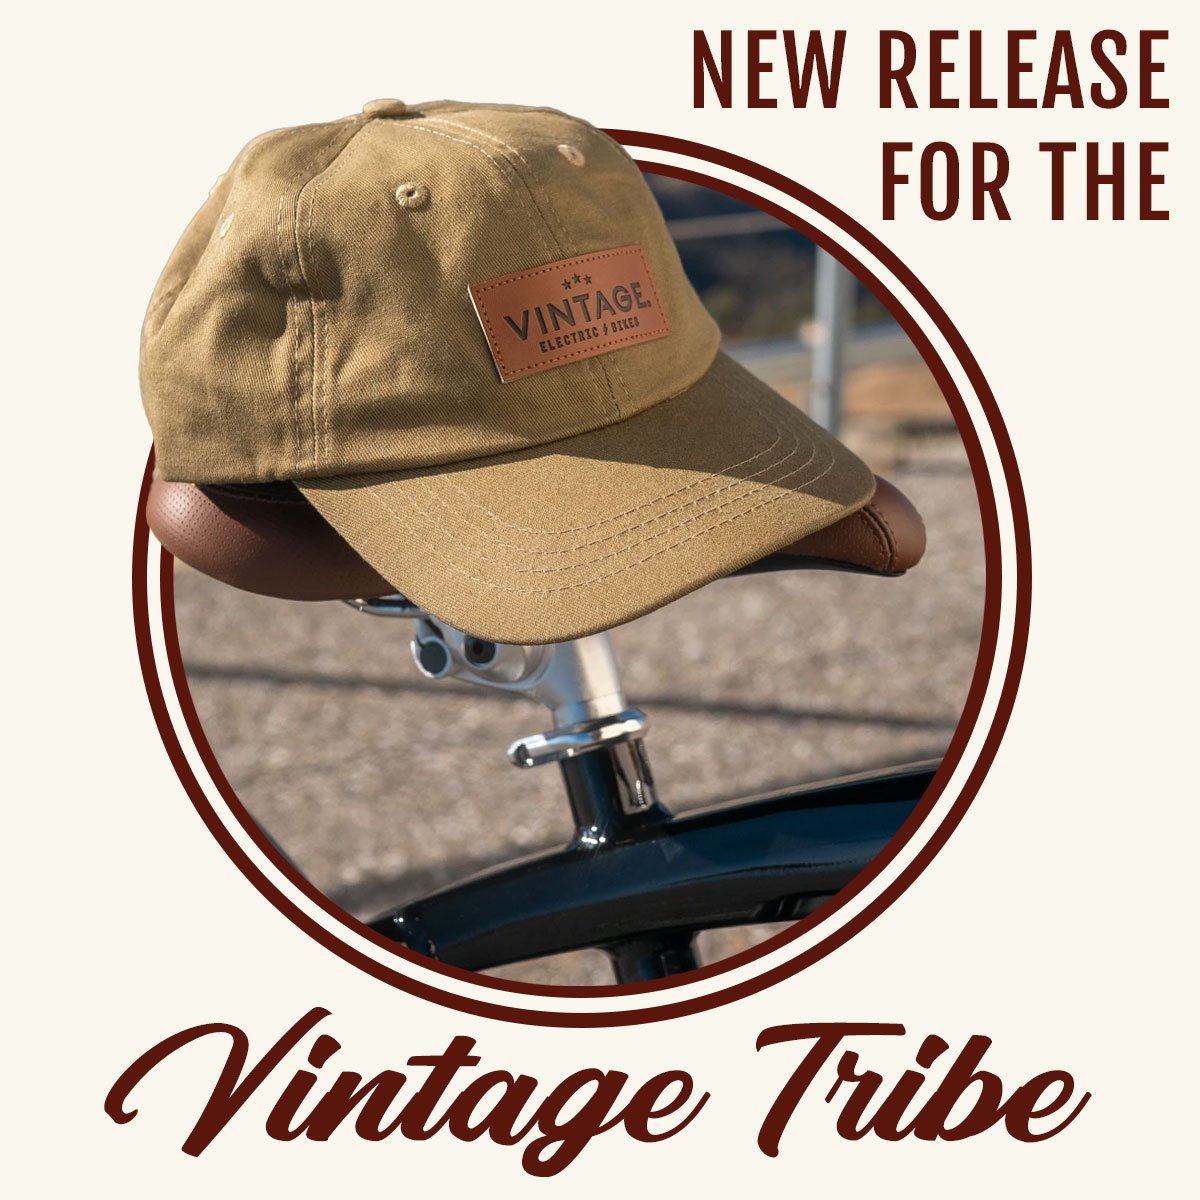 NEW RELEASE FOR THE VINTAGE TRIBE